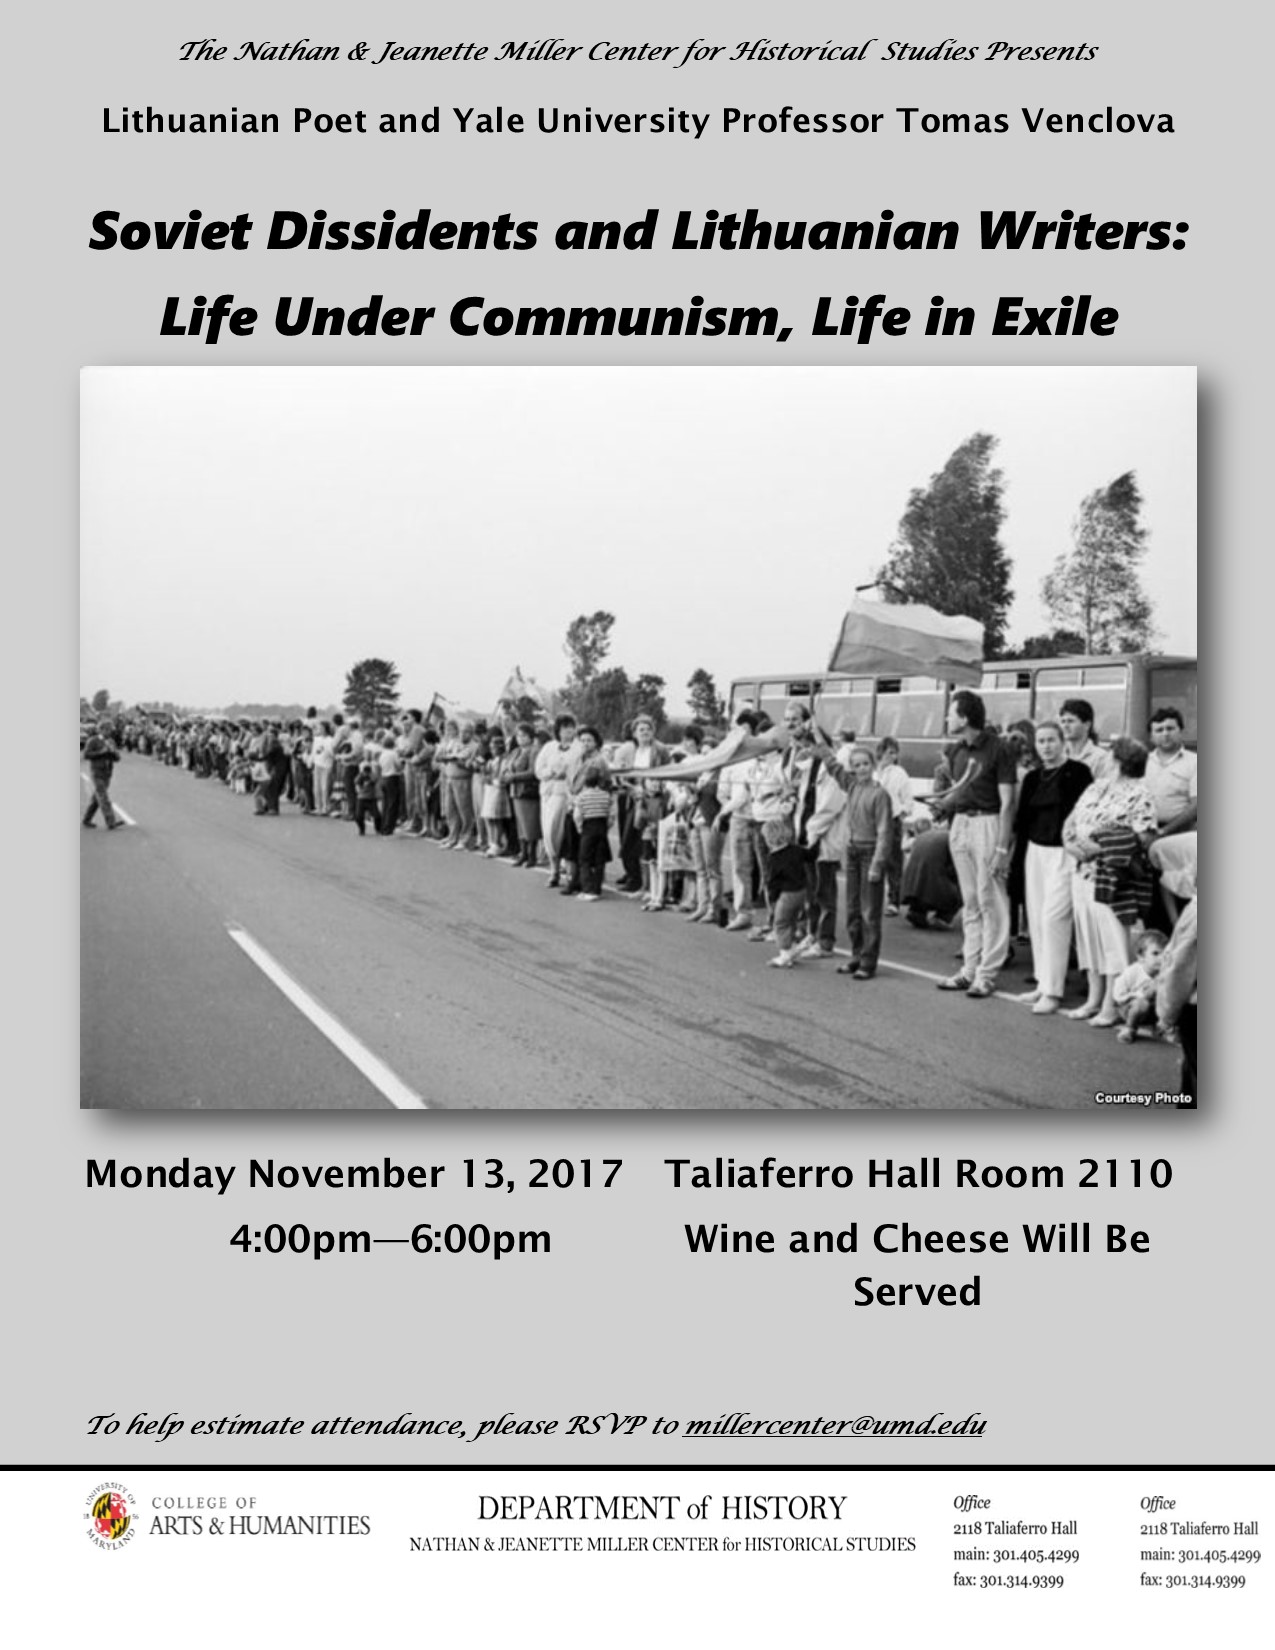 Image for event - Soviet Dissidents and Lithuanian Writers: Life Under Communism, Life in Exile